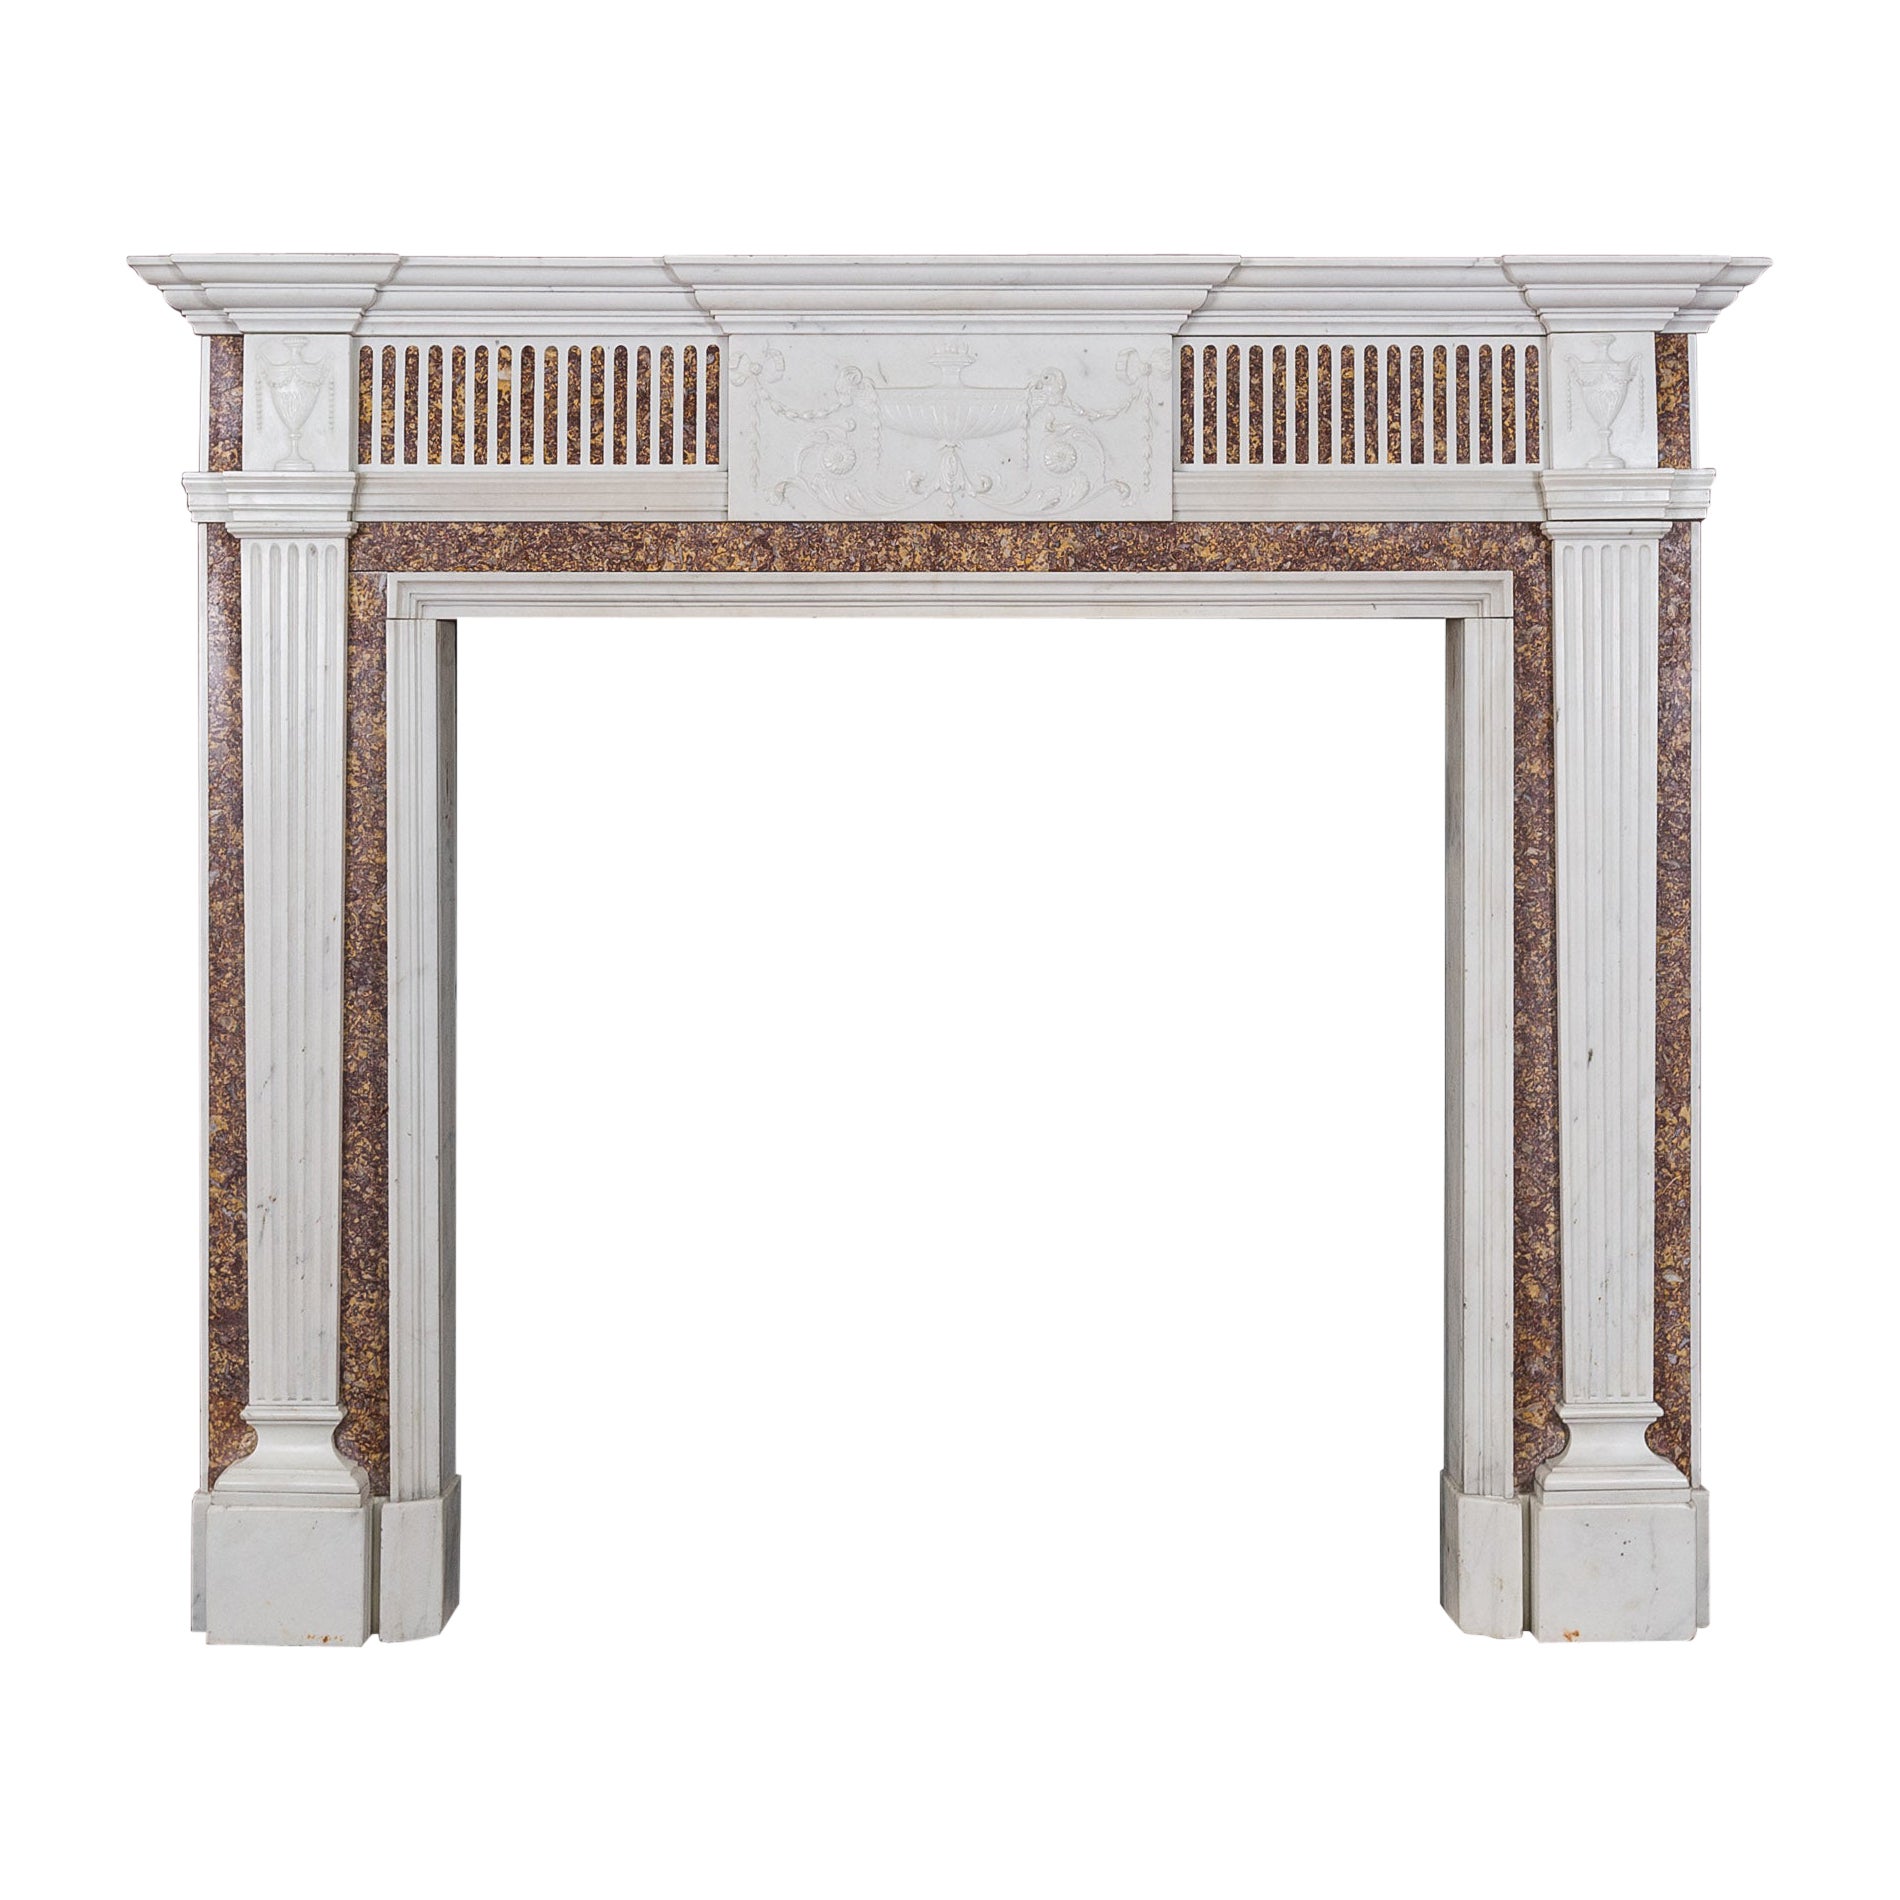 Georgian Statuary Marble Fireplace with Carved Tablet and Brocatelle Inlay